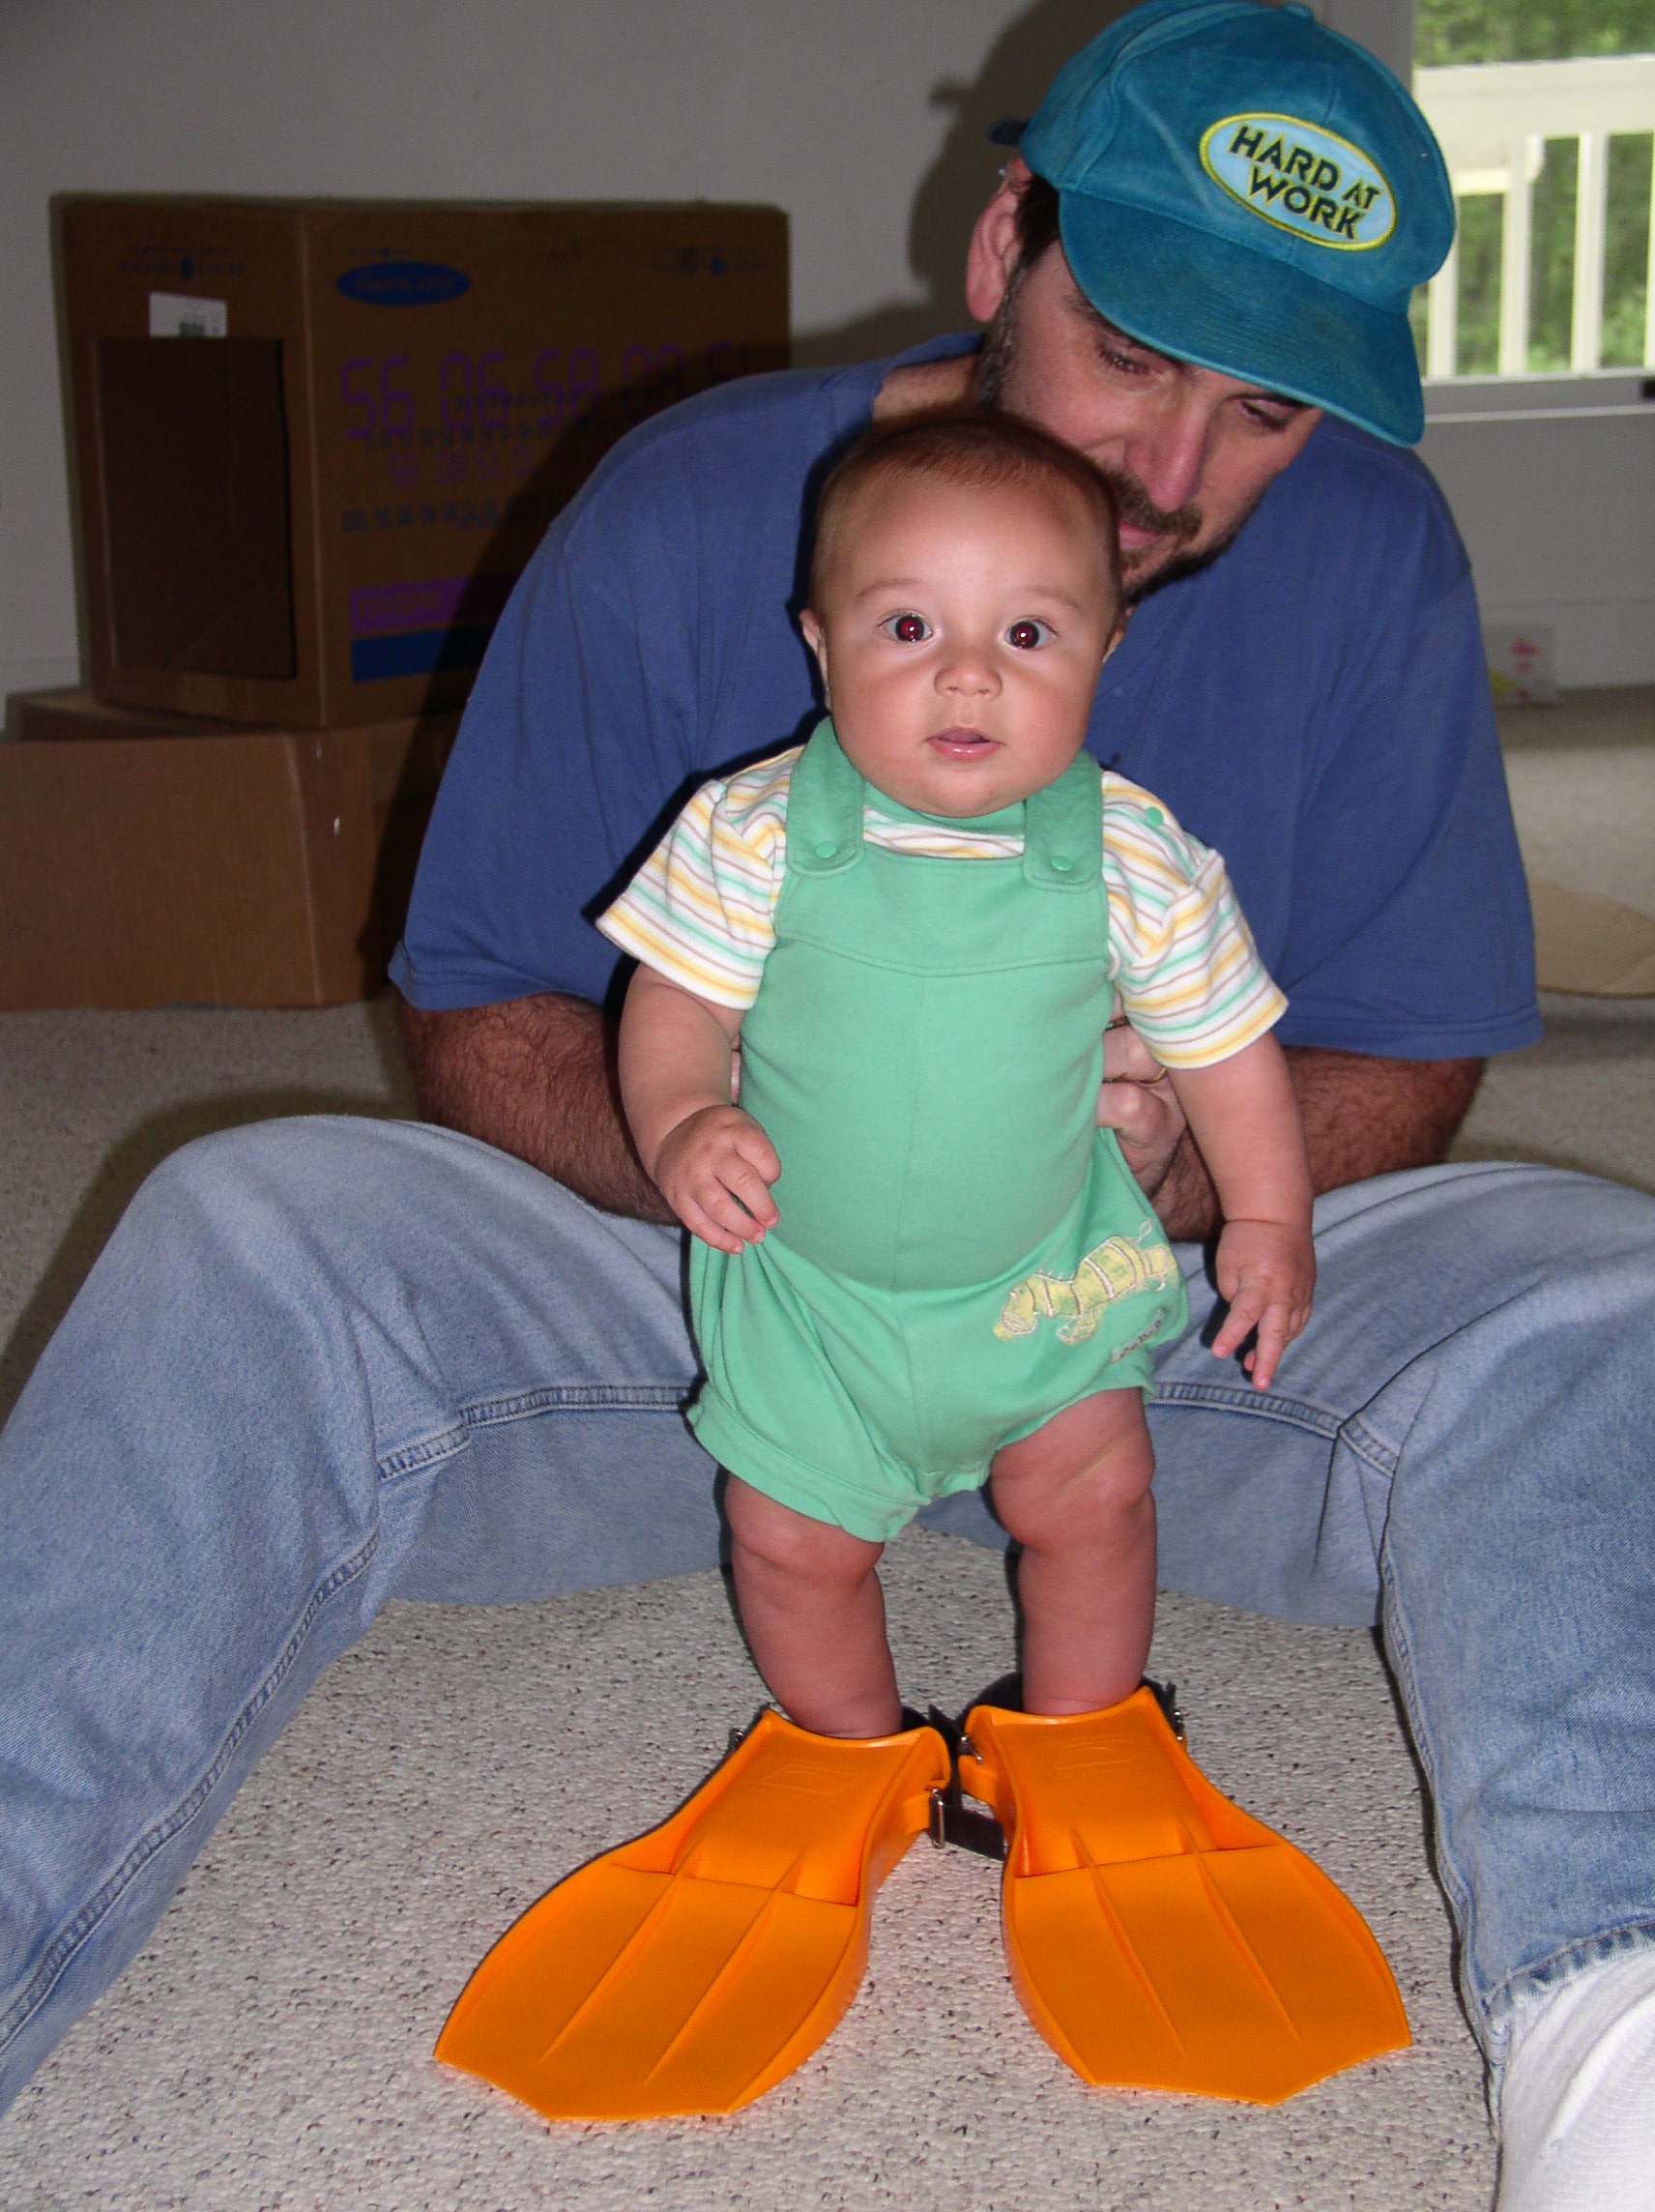 Christian today, about 4 months old now.
Gets his feet from his mother!